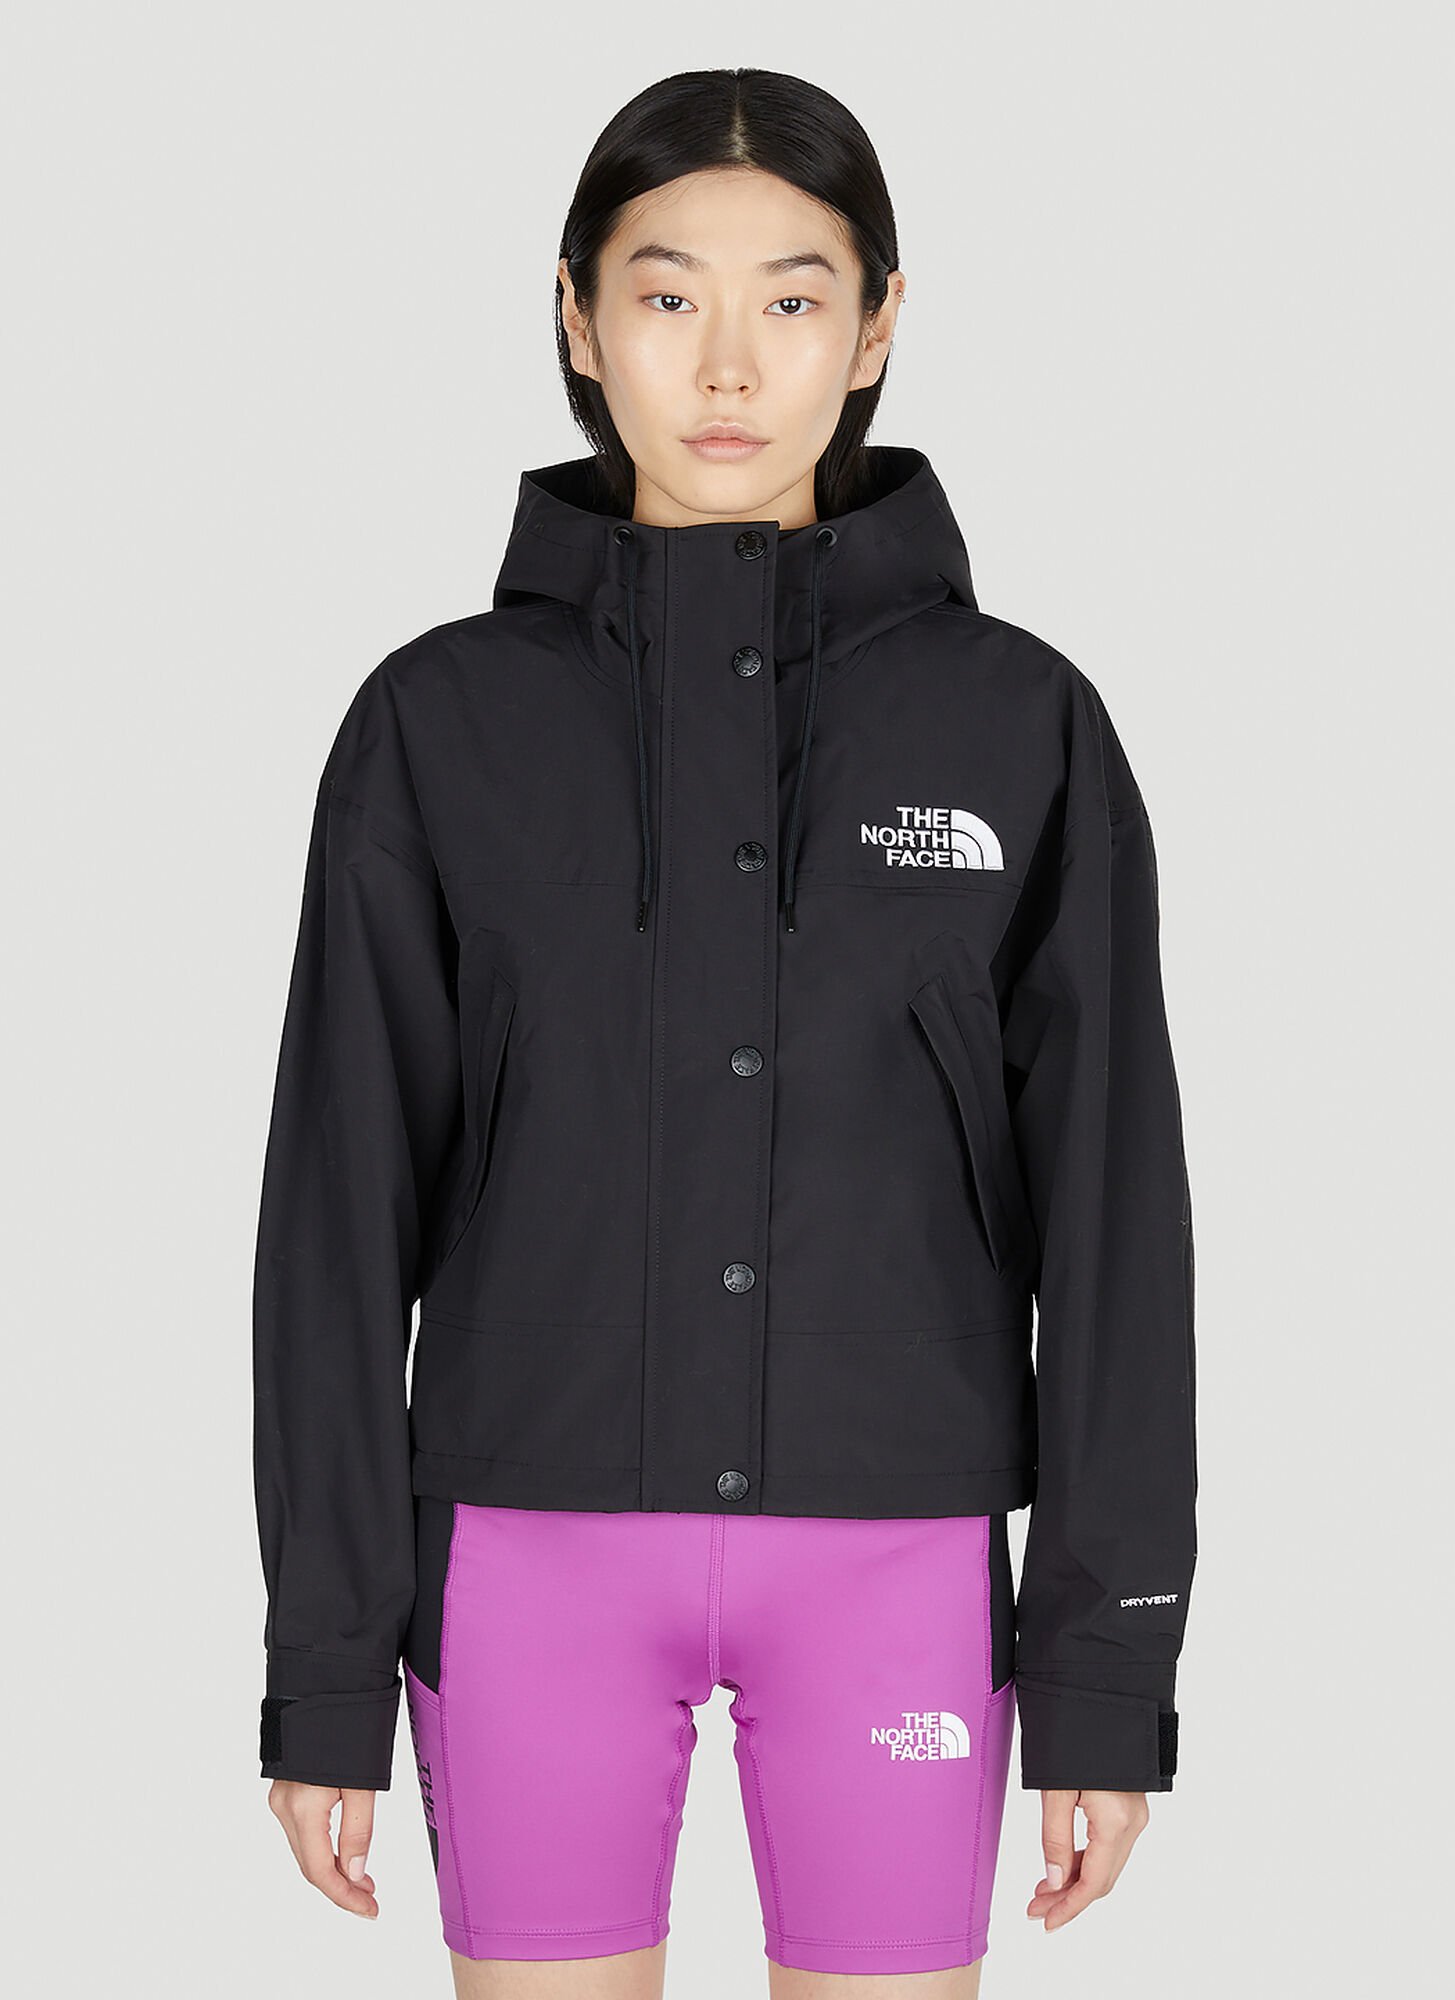 THE NORTH FACE REIGN ON JACKET